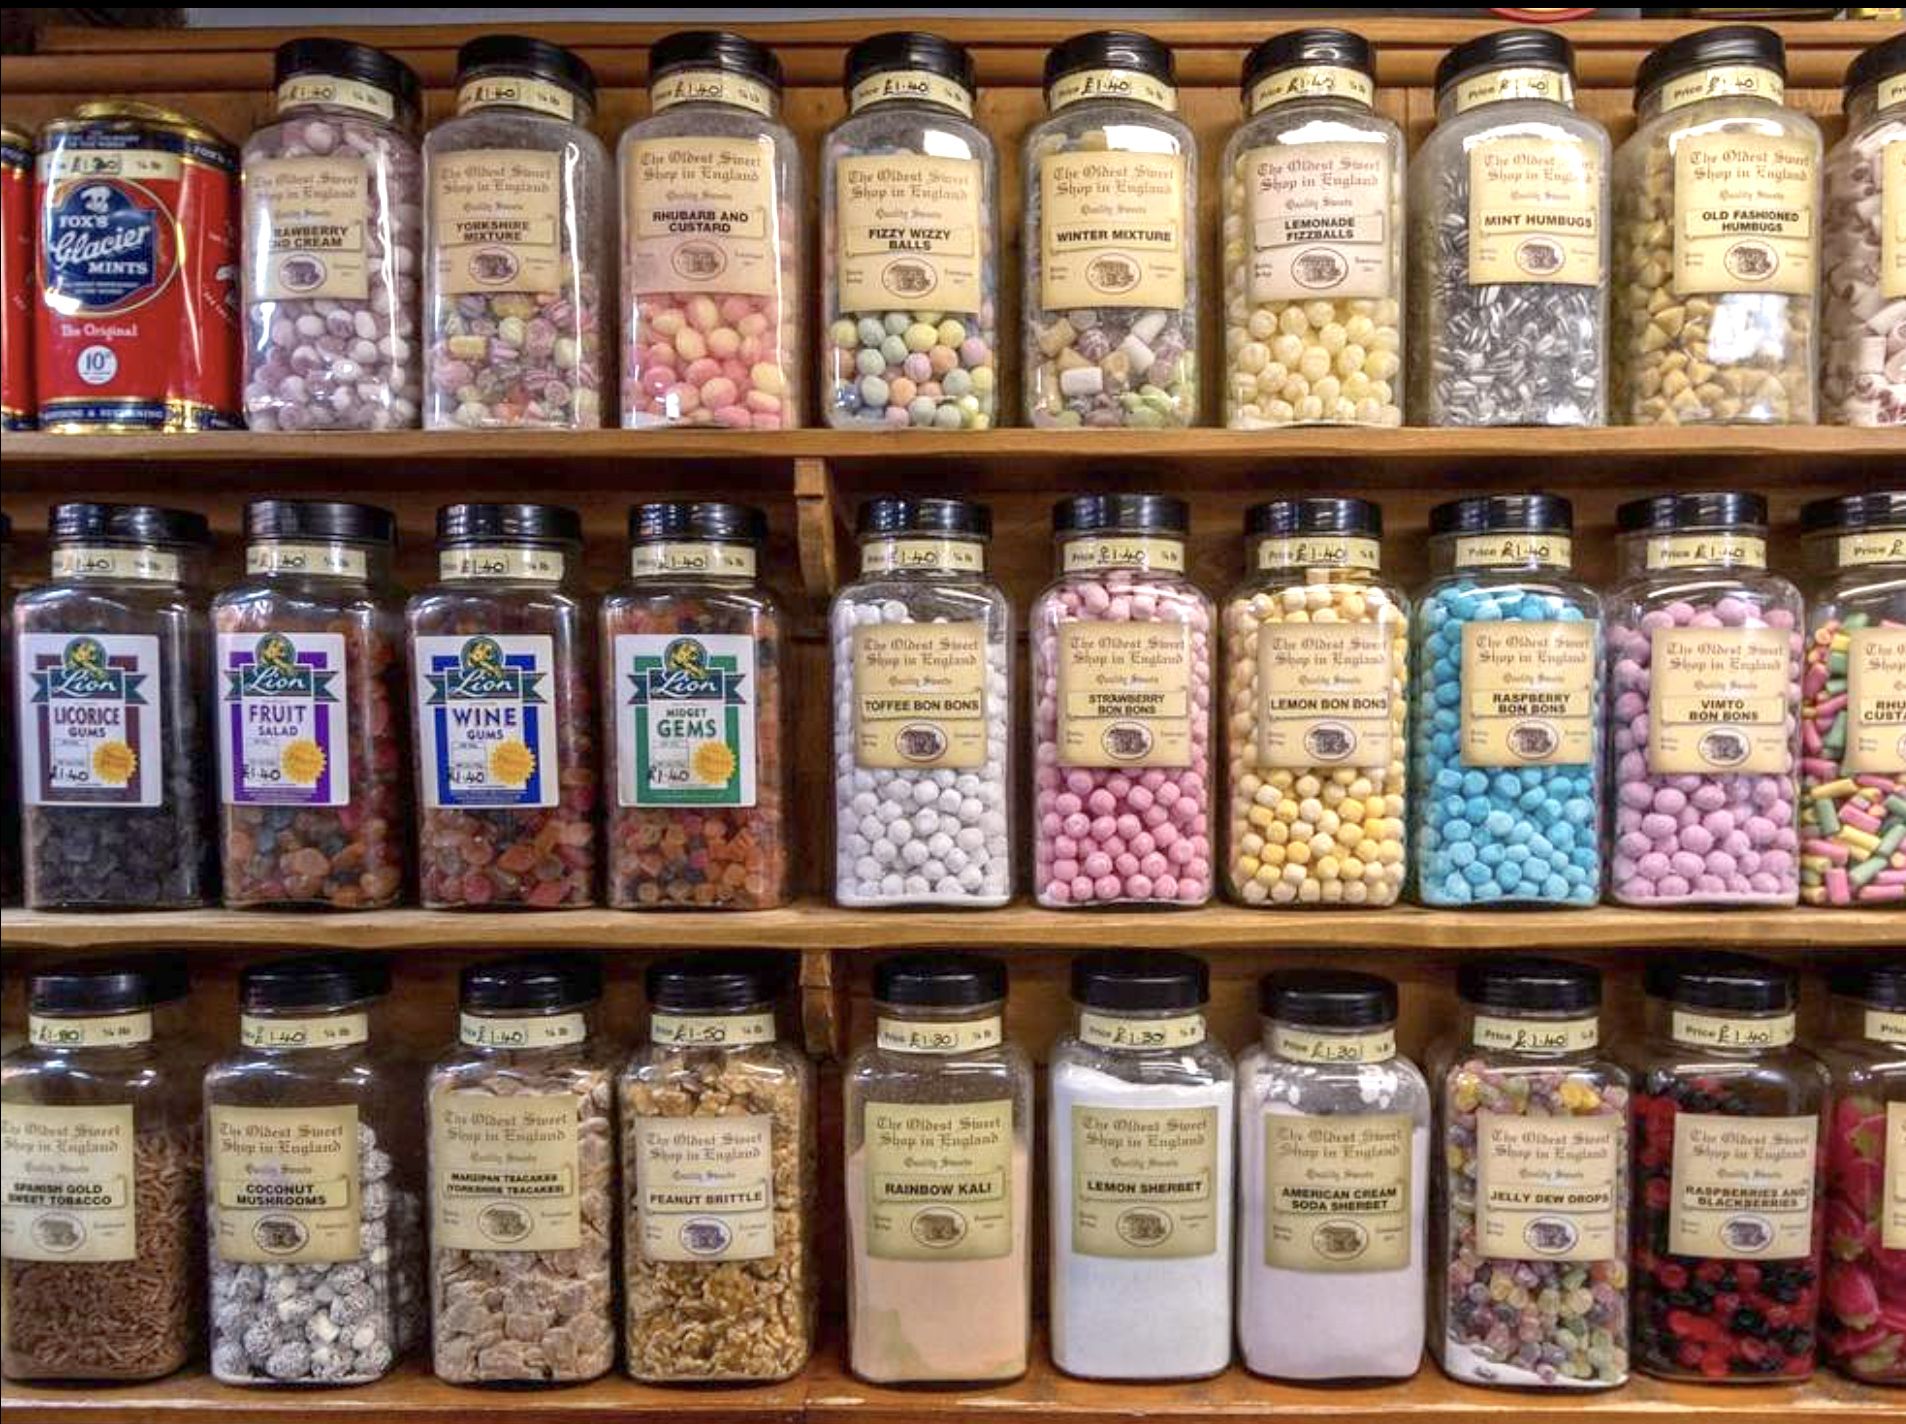 NOSTALGIA: The sweetie shop jars of yesteryear